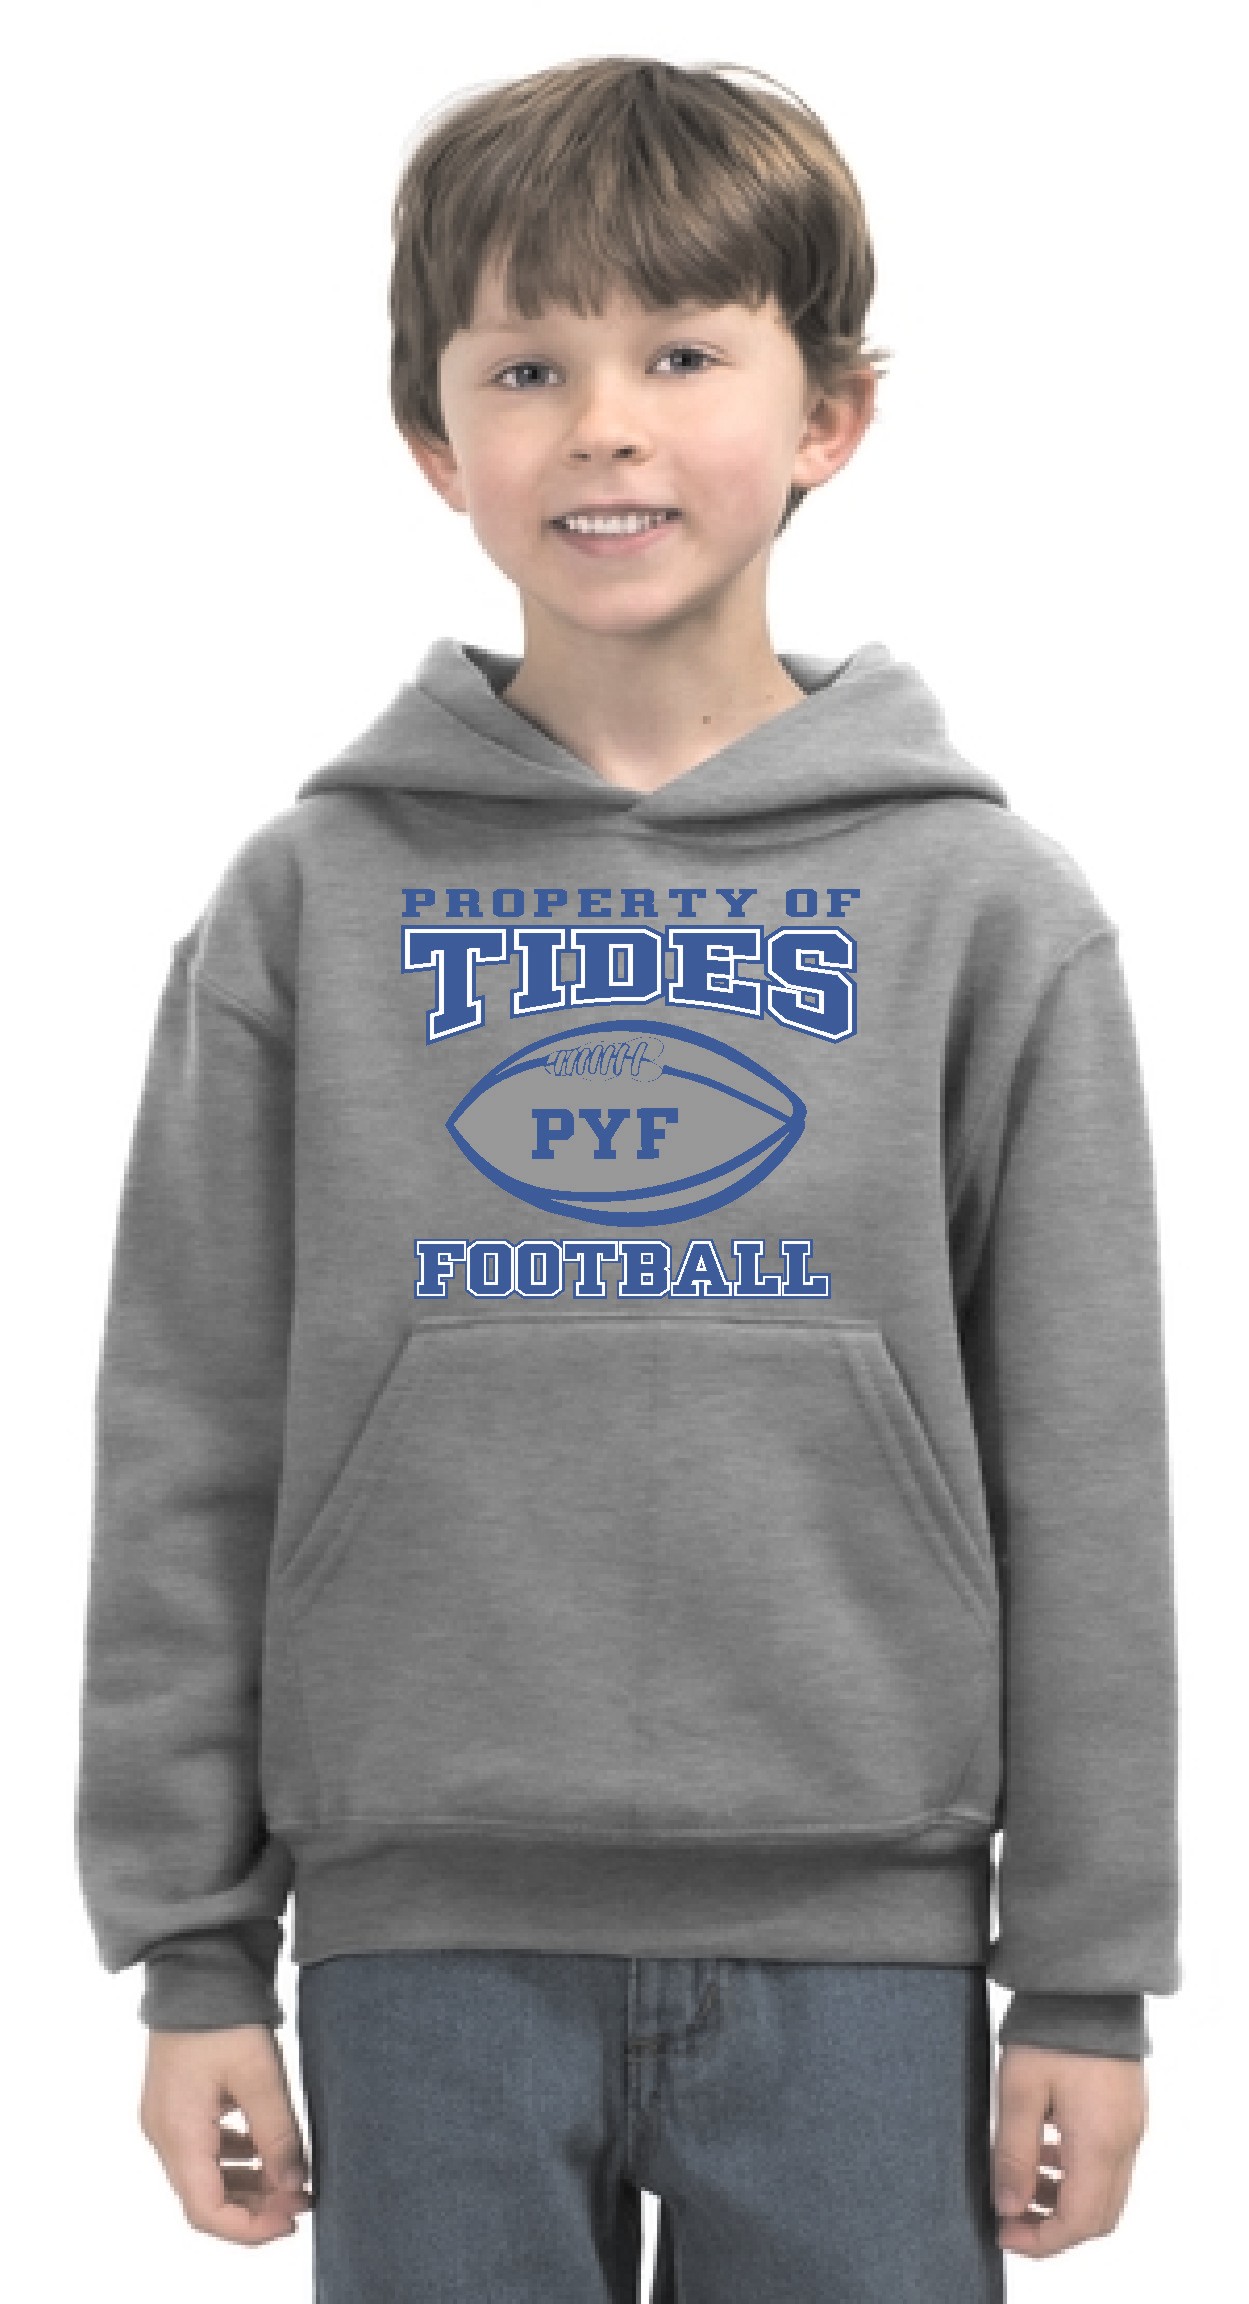 Youth P&C Property of Tides Hooded Sweatshirt